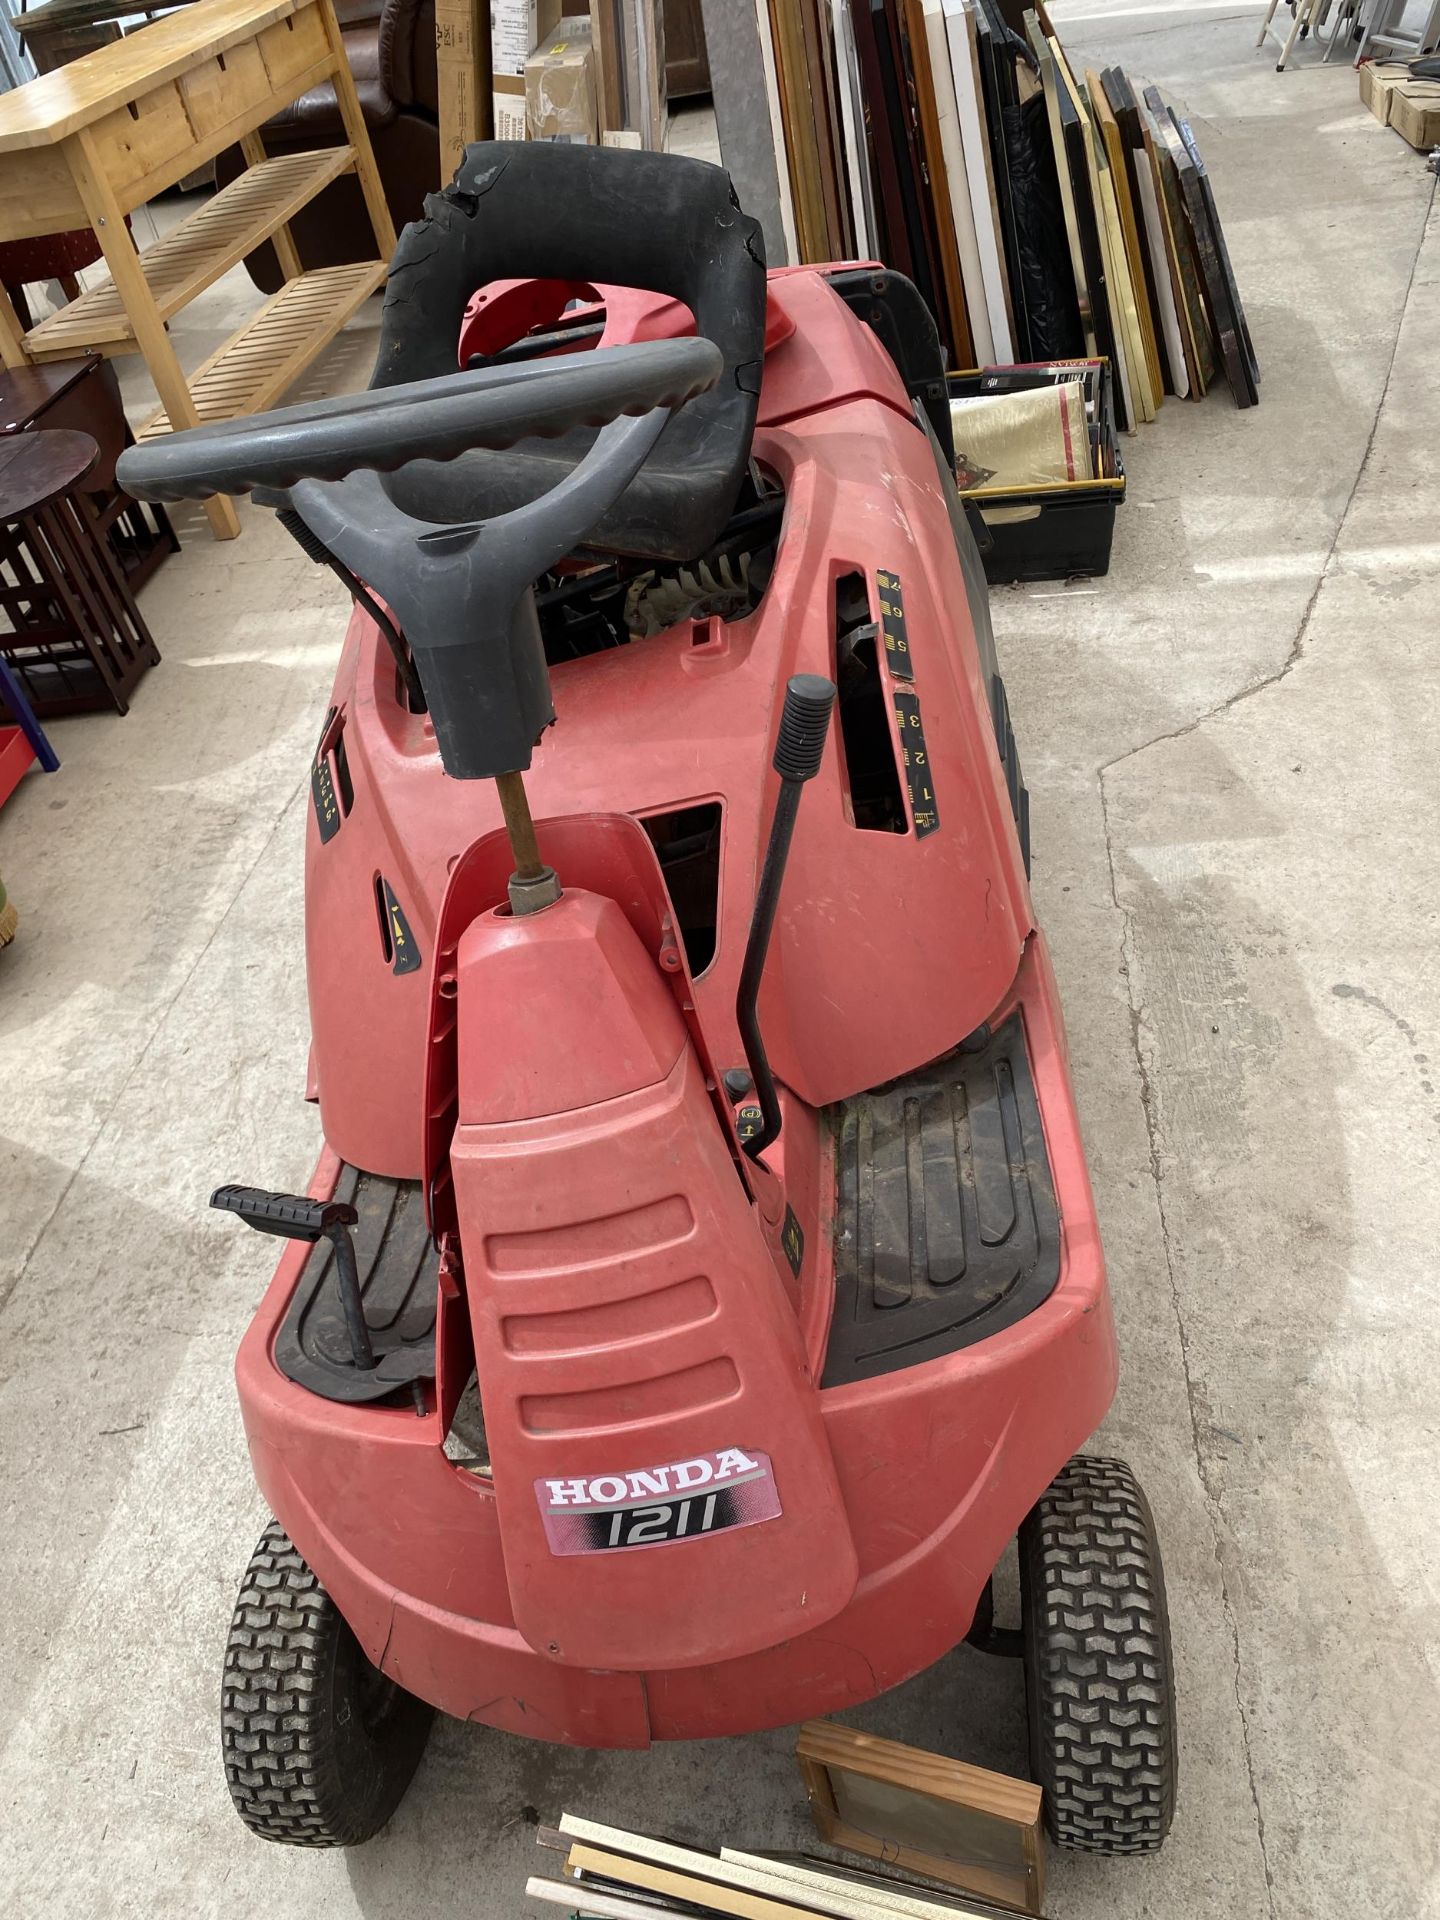 A HONDA 1211 RIDE ON LAWN MOWER WITH GRASS BOX FOR SPARES AND REPAIRS - Image 2 of 6